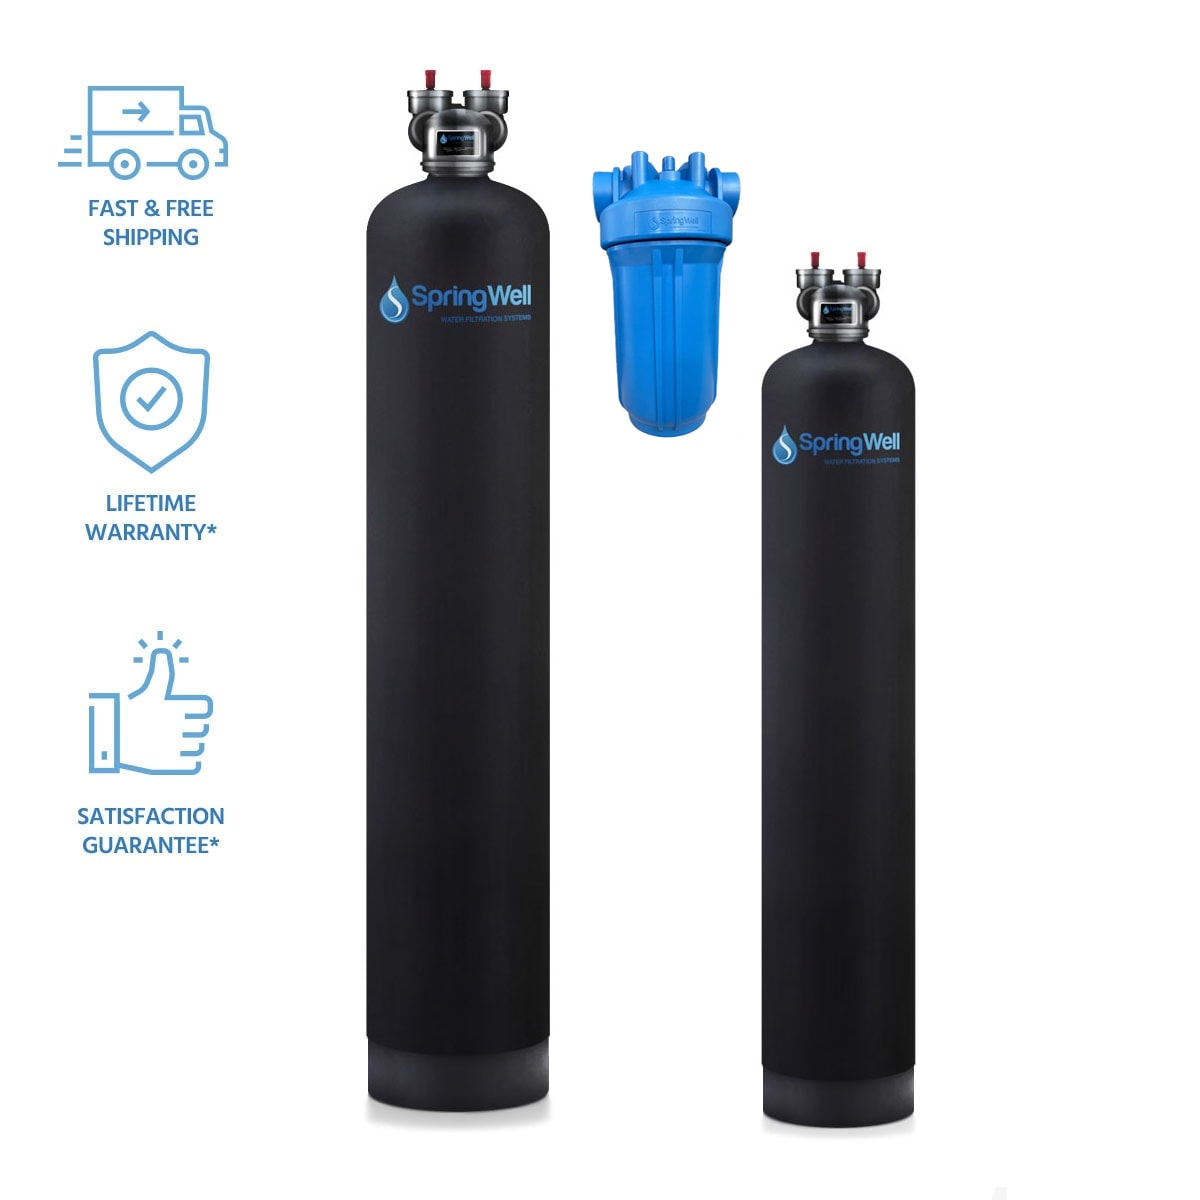 Portable Double Standard Water Softener - On The Go - Portable